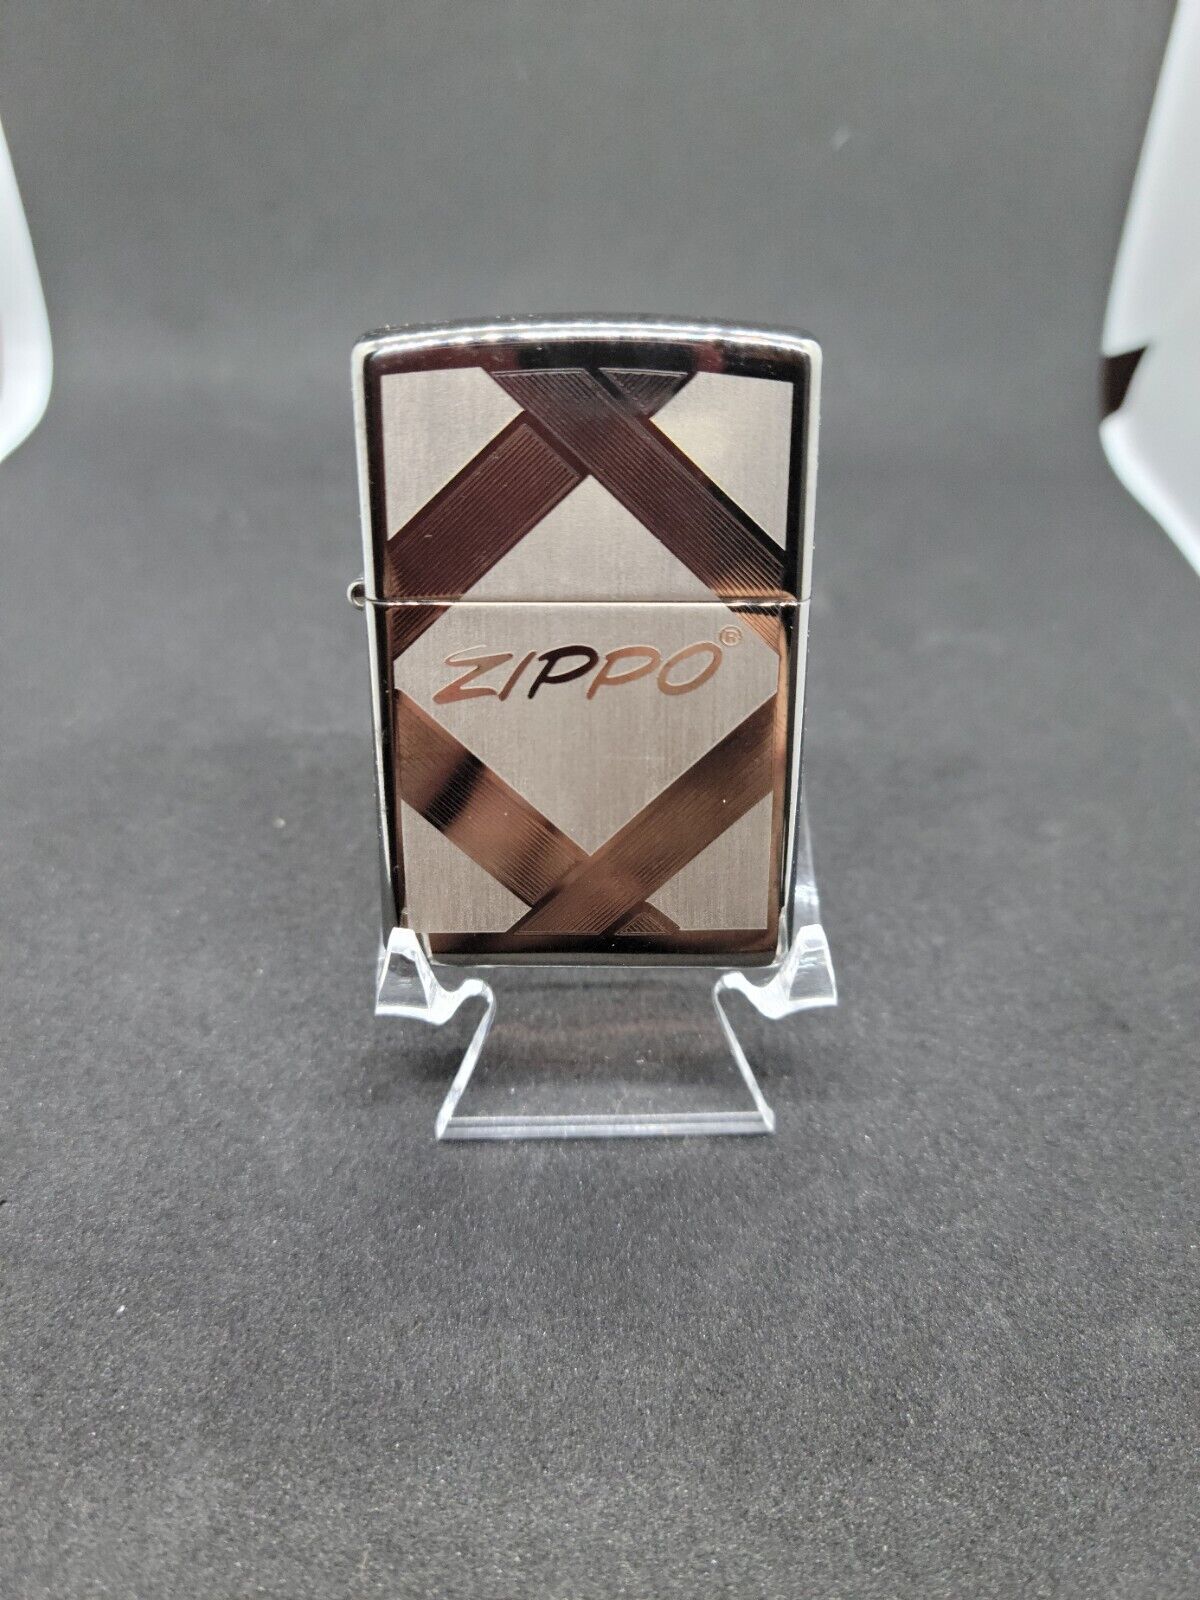 ZIPPO 2007 UNPARALLED TRADITION POLISHED CHROME LIGHTER SEALED IN BOX